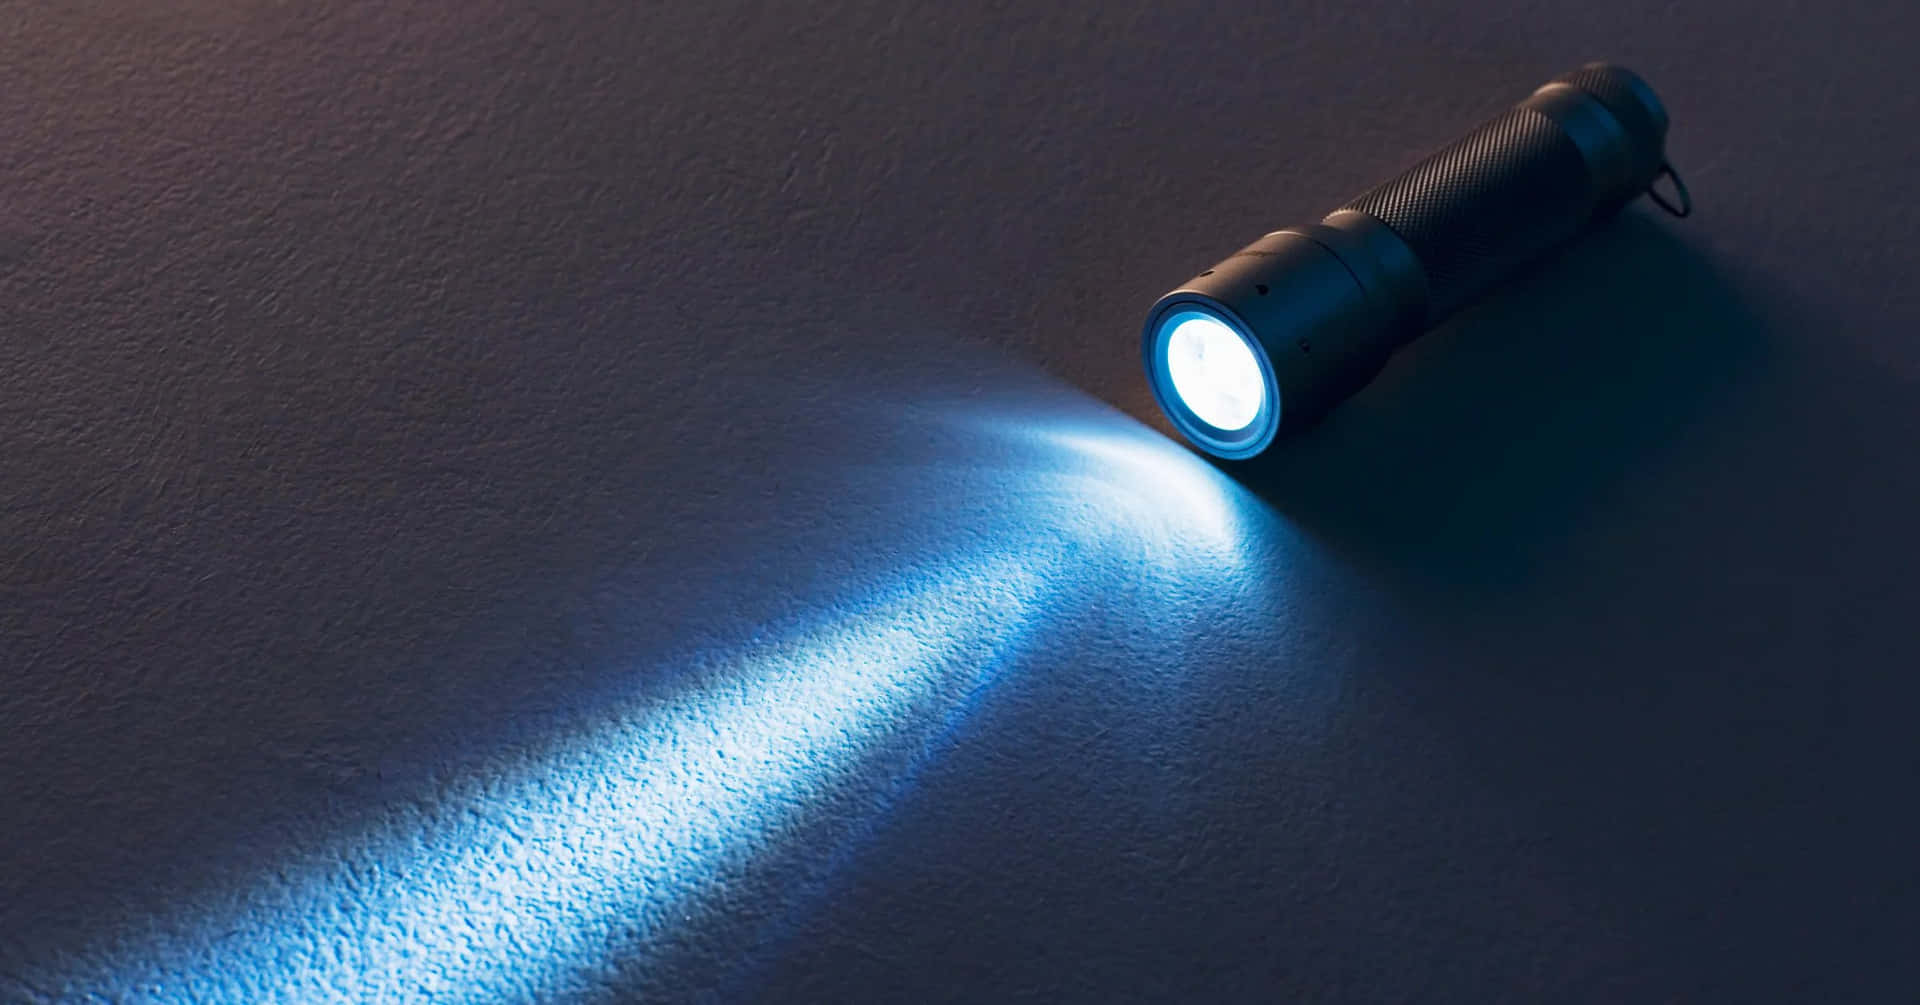 Discover a whole new world with a Flashlight.